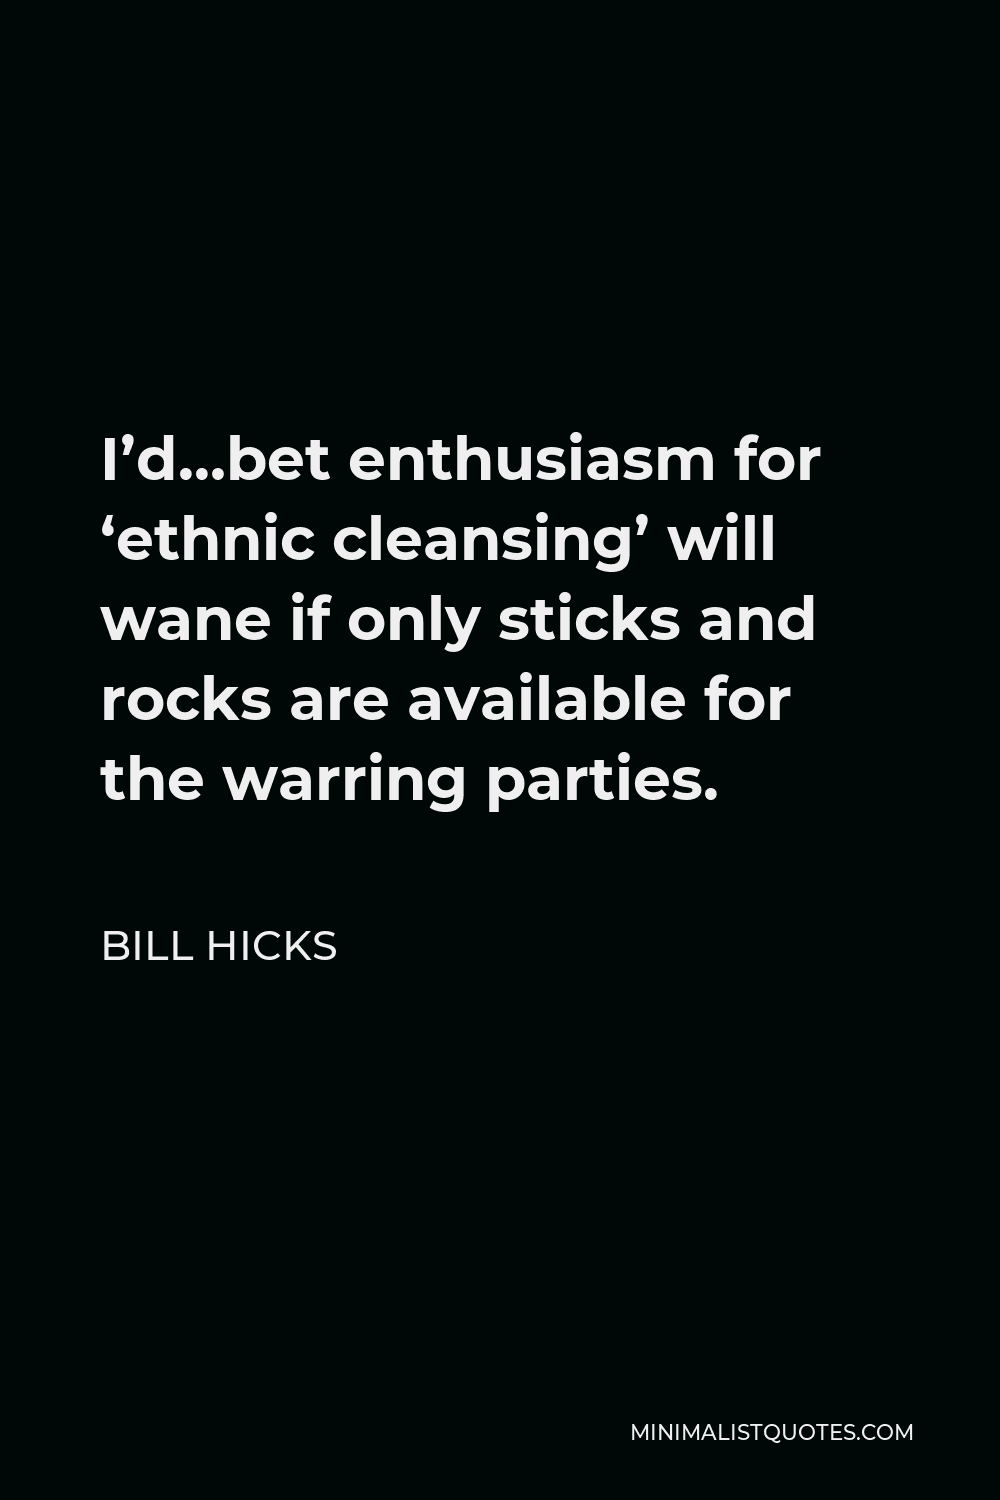 Bill Hicks Quote - I’d…bet enthusiasm for ‘ethnic cleansing’ will wane if only sticks and rocks are available for the warring parties.